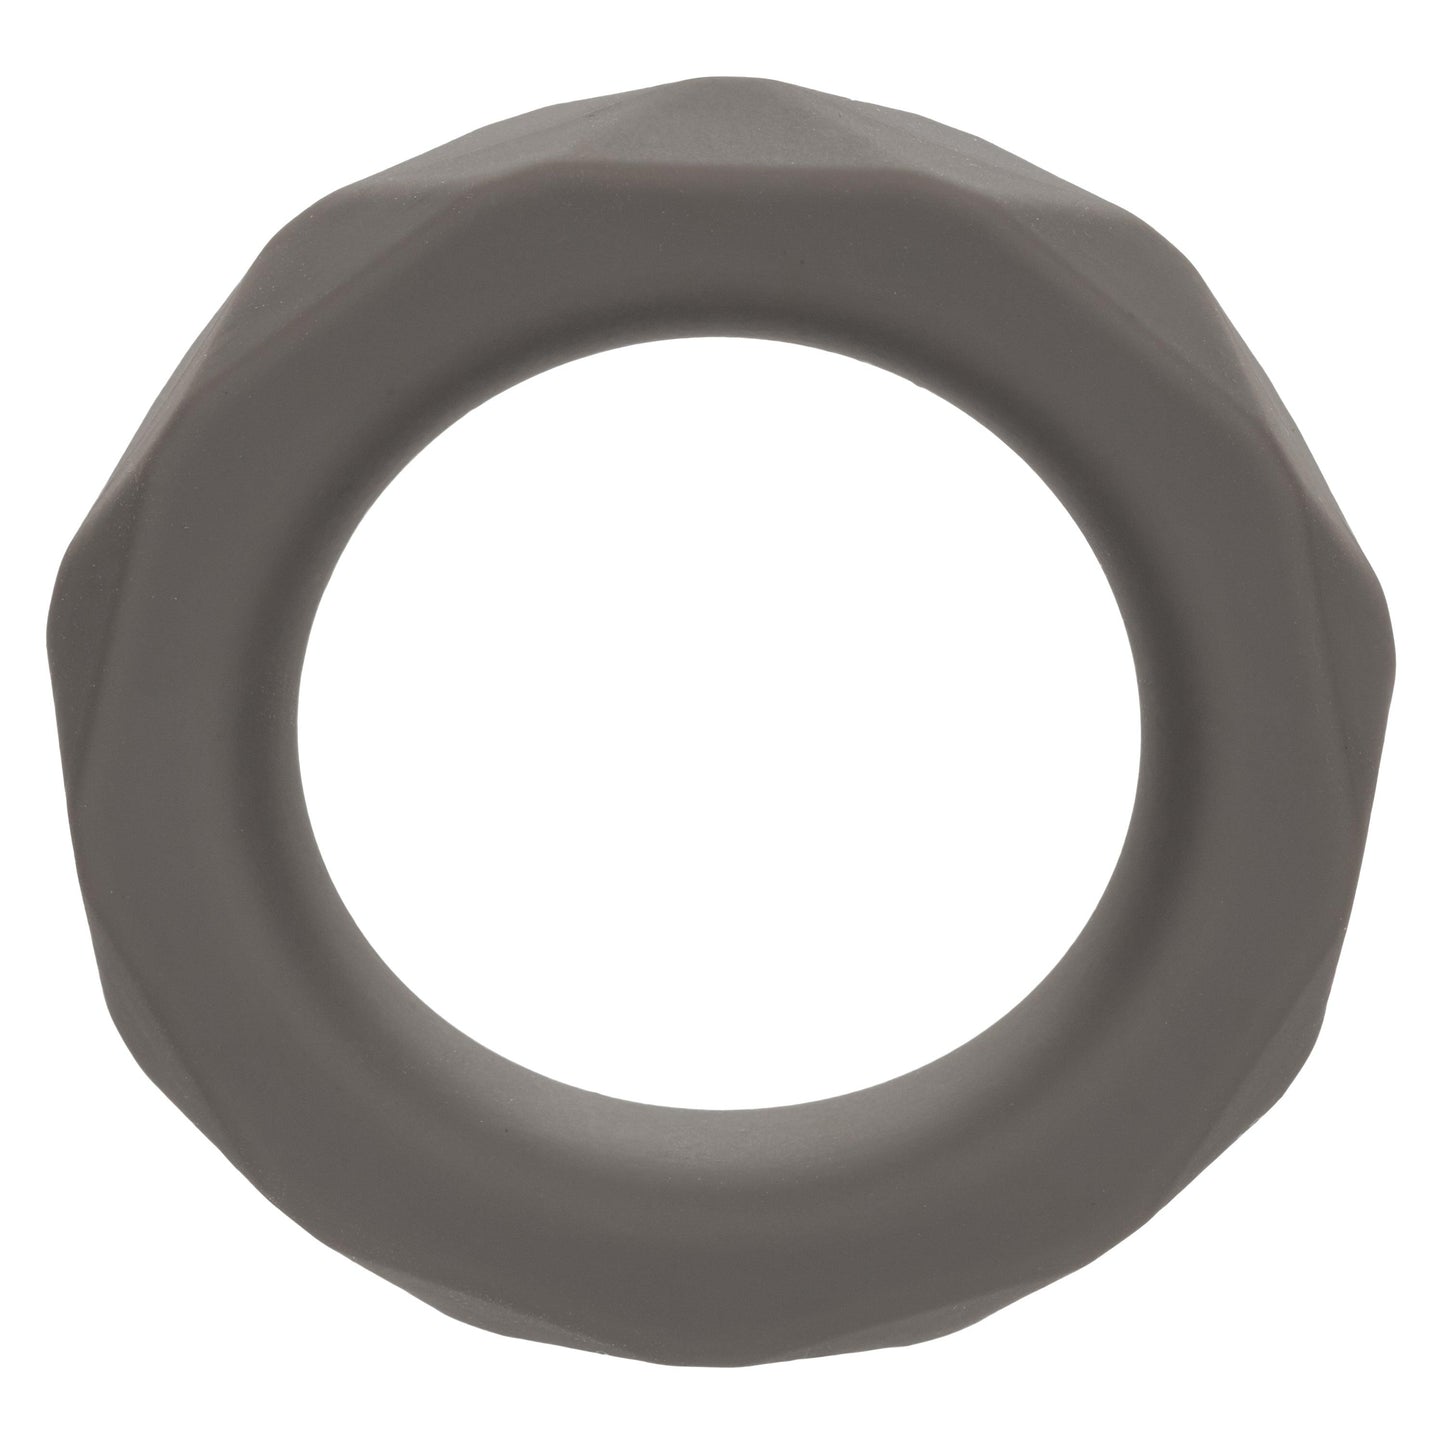 Alpha Liquid Silicone Prolong Prismatic Ring - Gray - My Sex Toy Hub